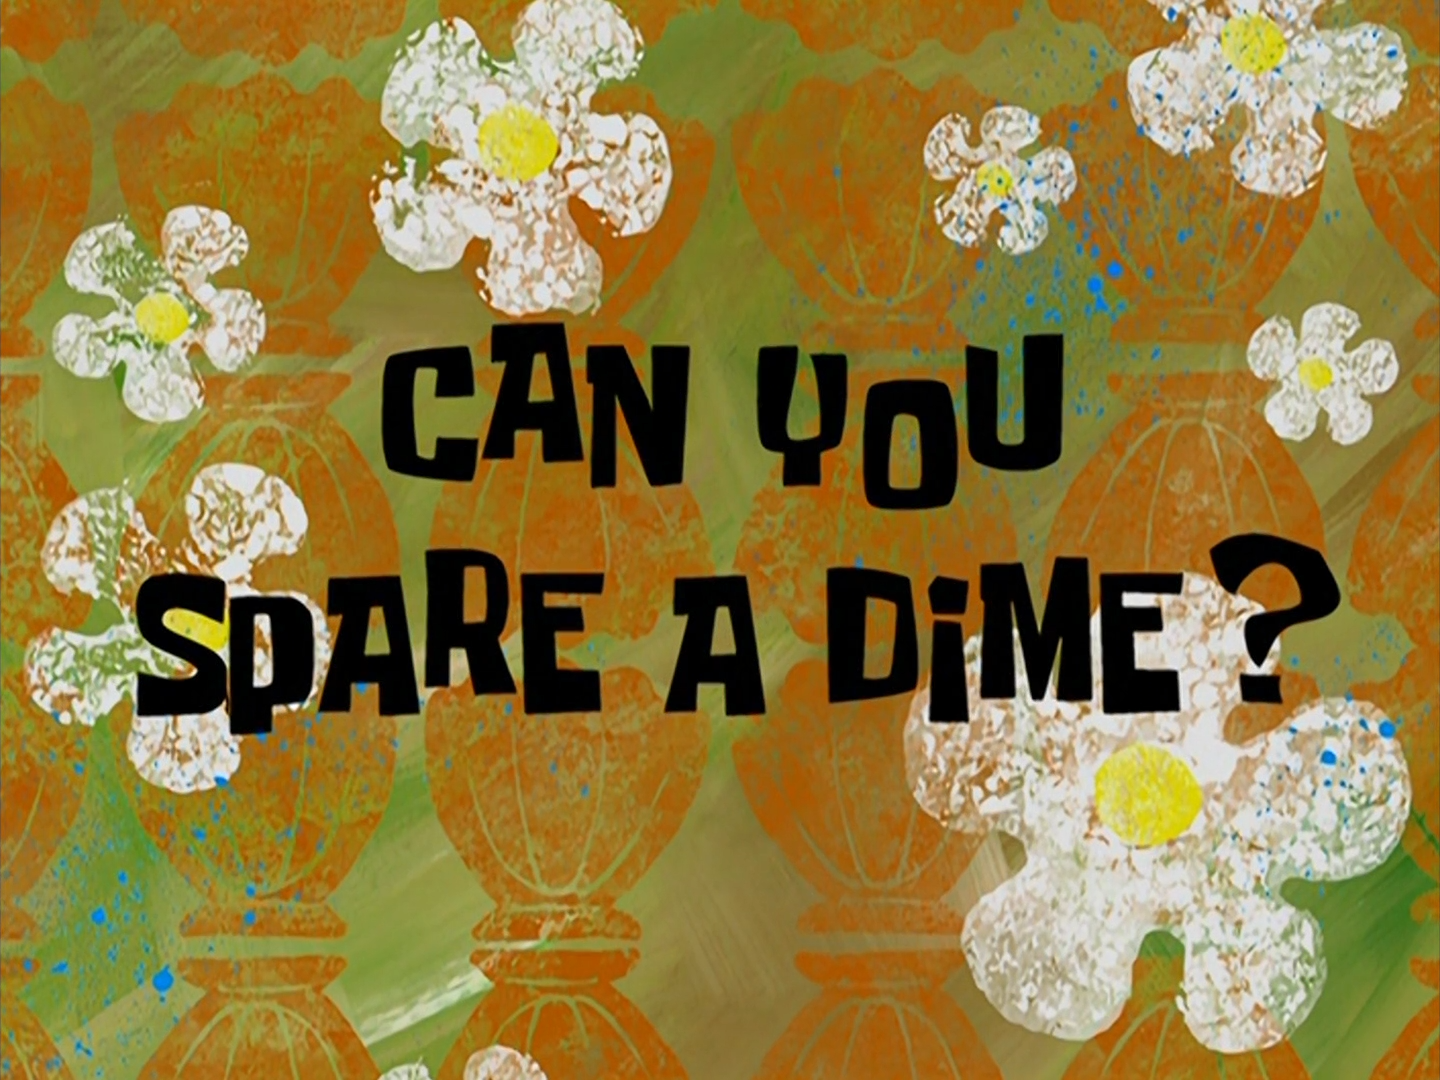 https://static.wikia.nocookie.net/spongebob/images/2/2b/Can_You_Spare_a_Dime%3F_title_card.png/revision/latest?cb=20230308145440